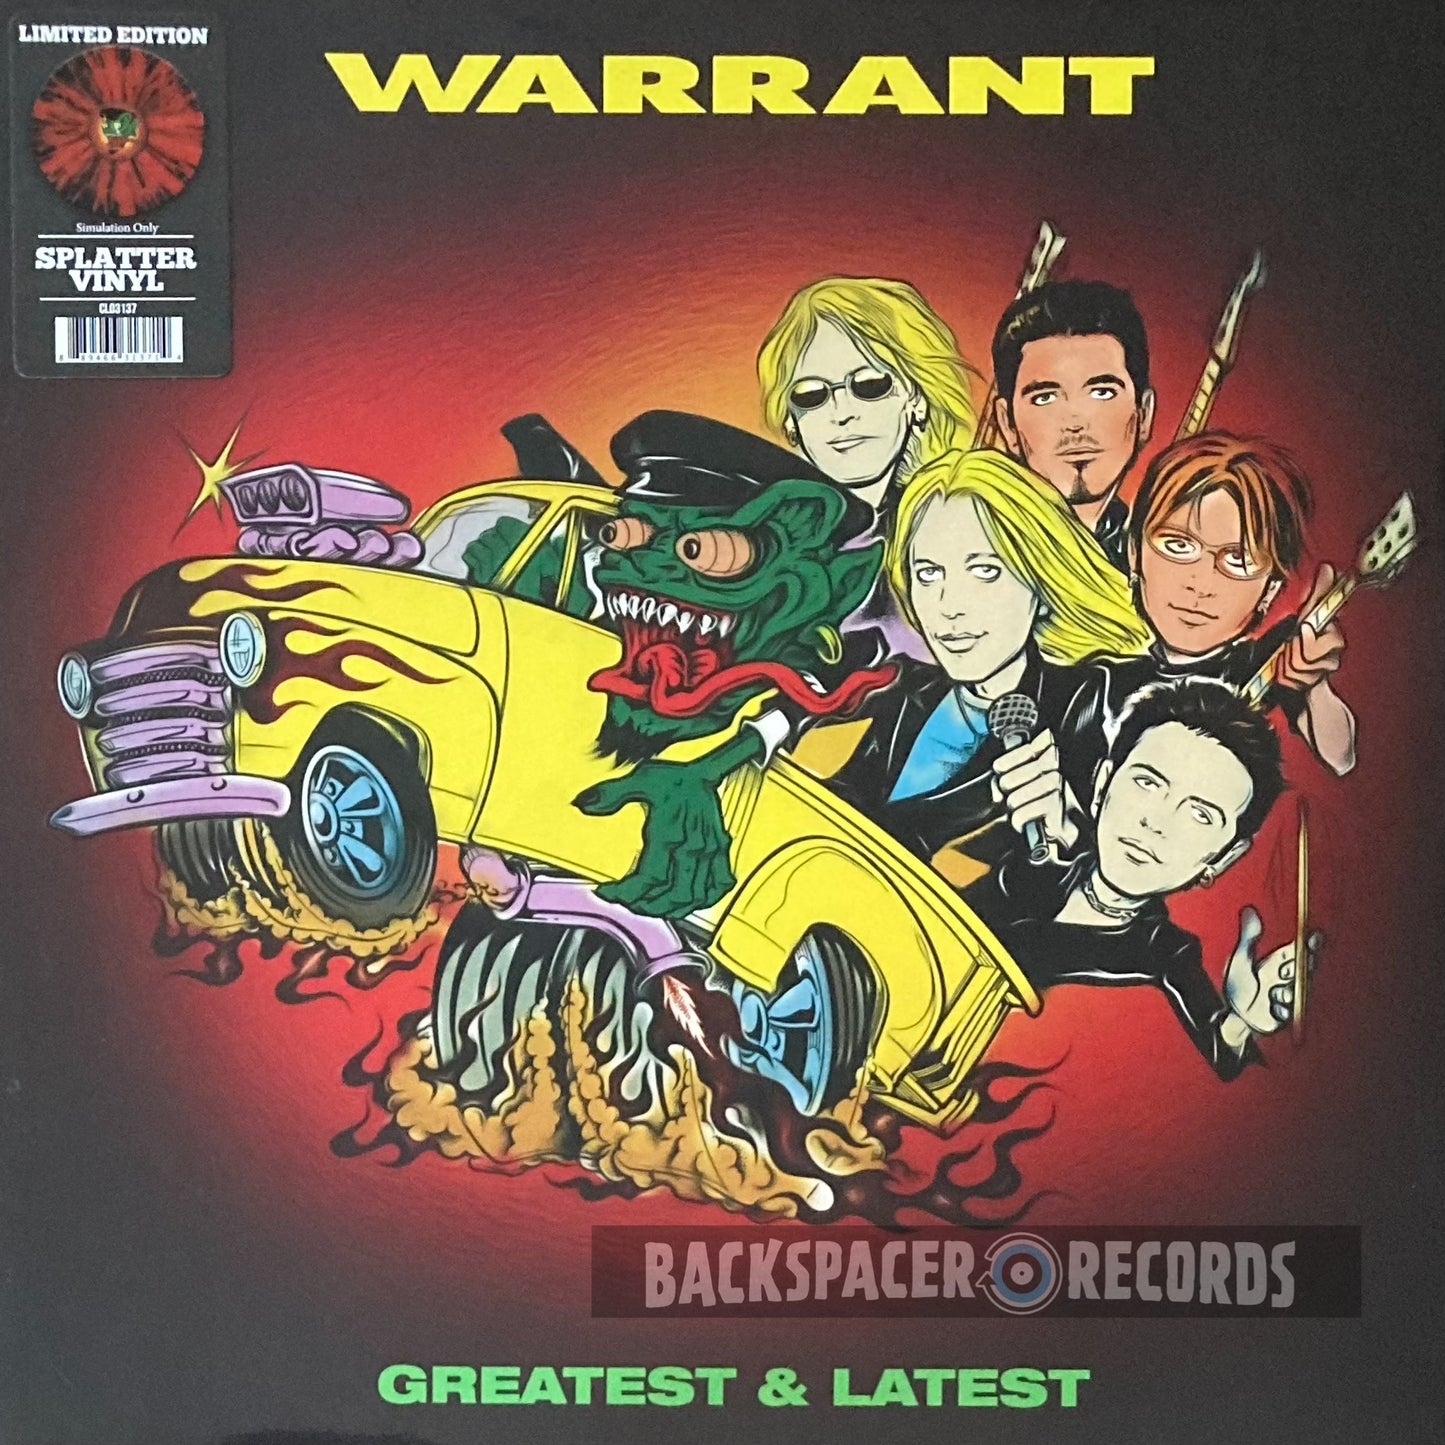 Warrant – Greatest & Latest (Limited Edition) LP (Sealed)